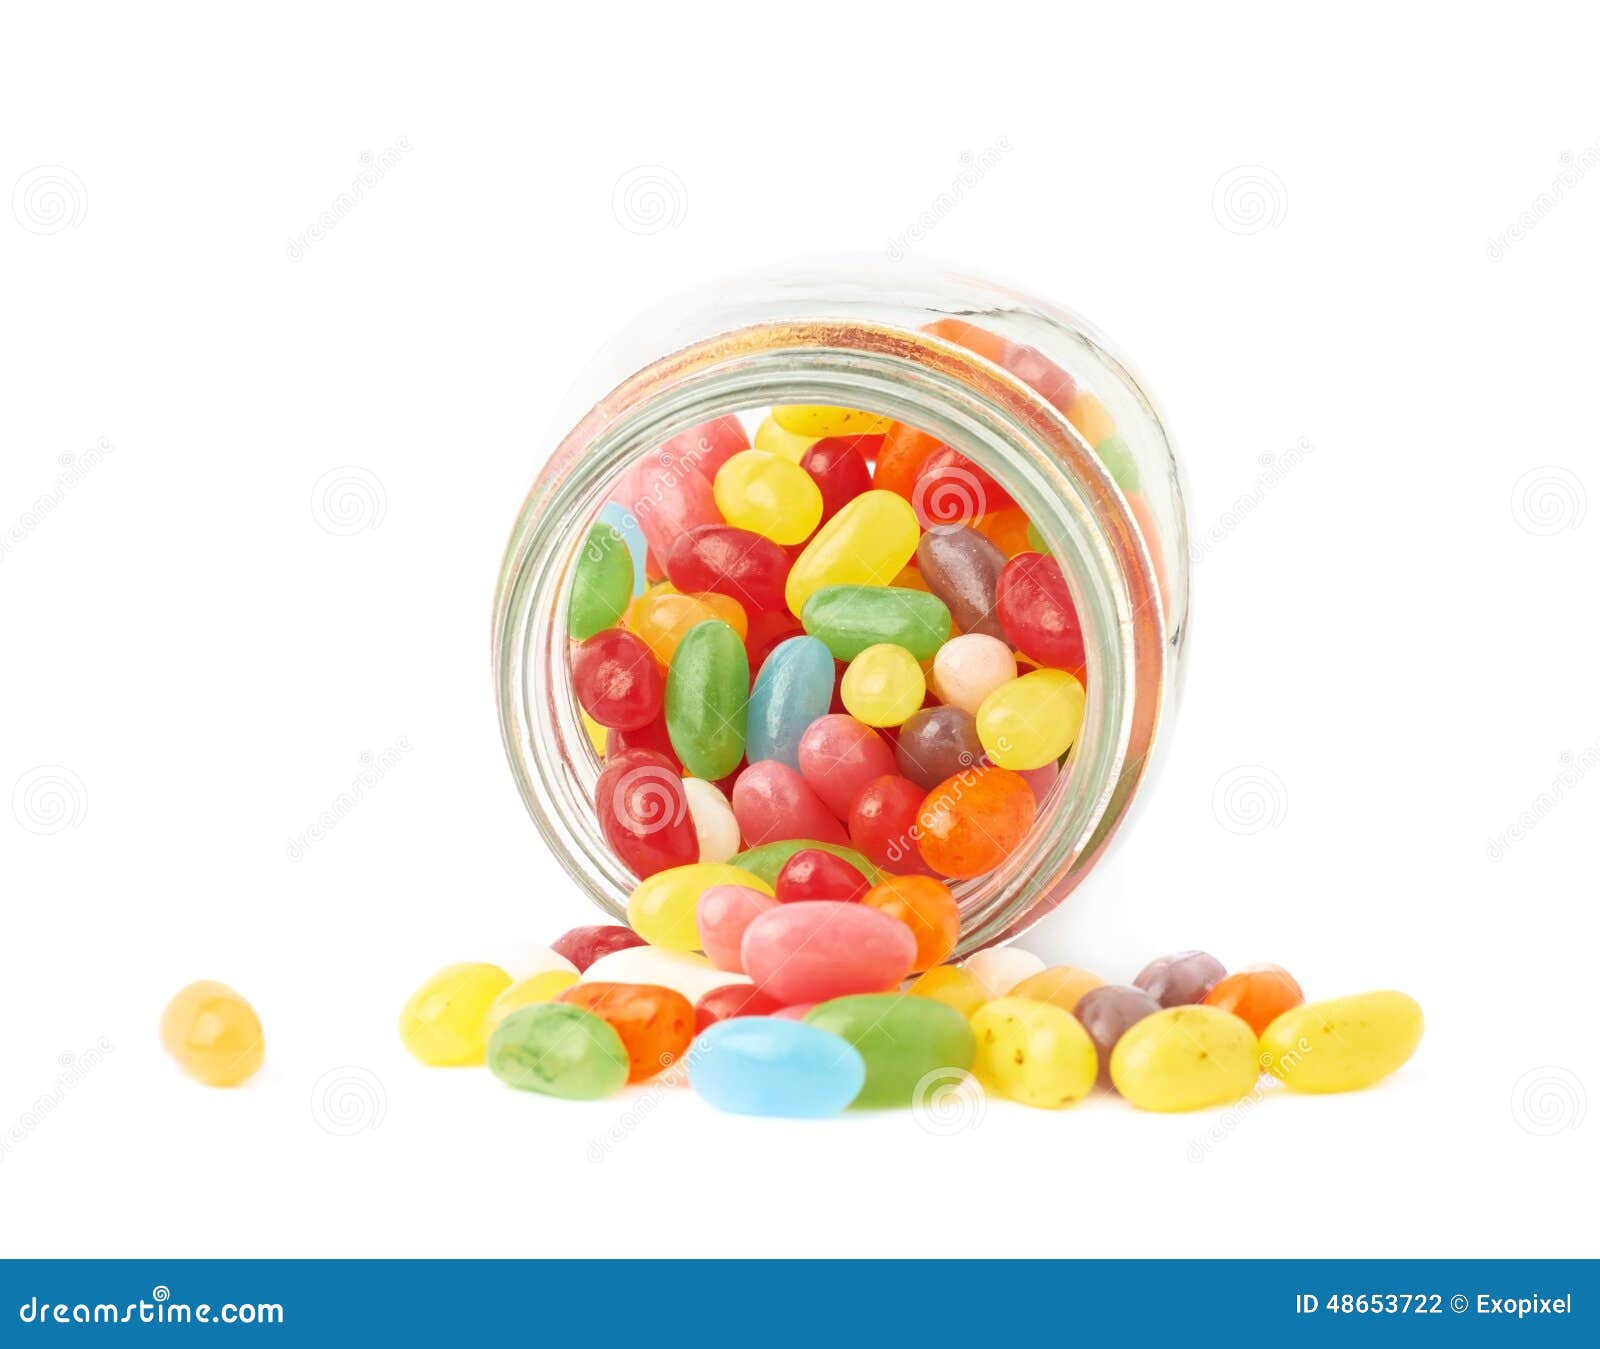 Jelly Bean Candies Spilled Out of Jar Stock Photo - Image of ...